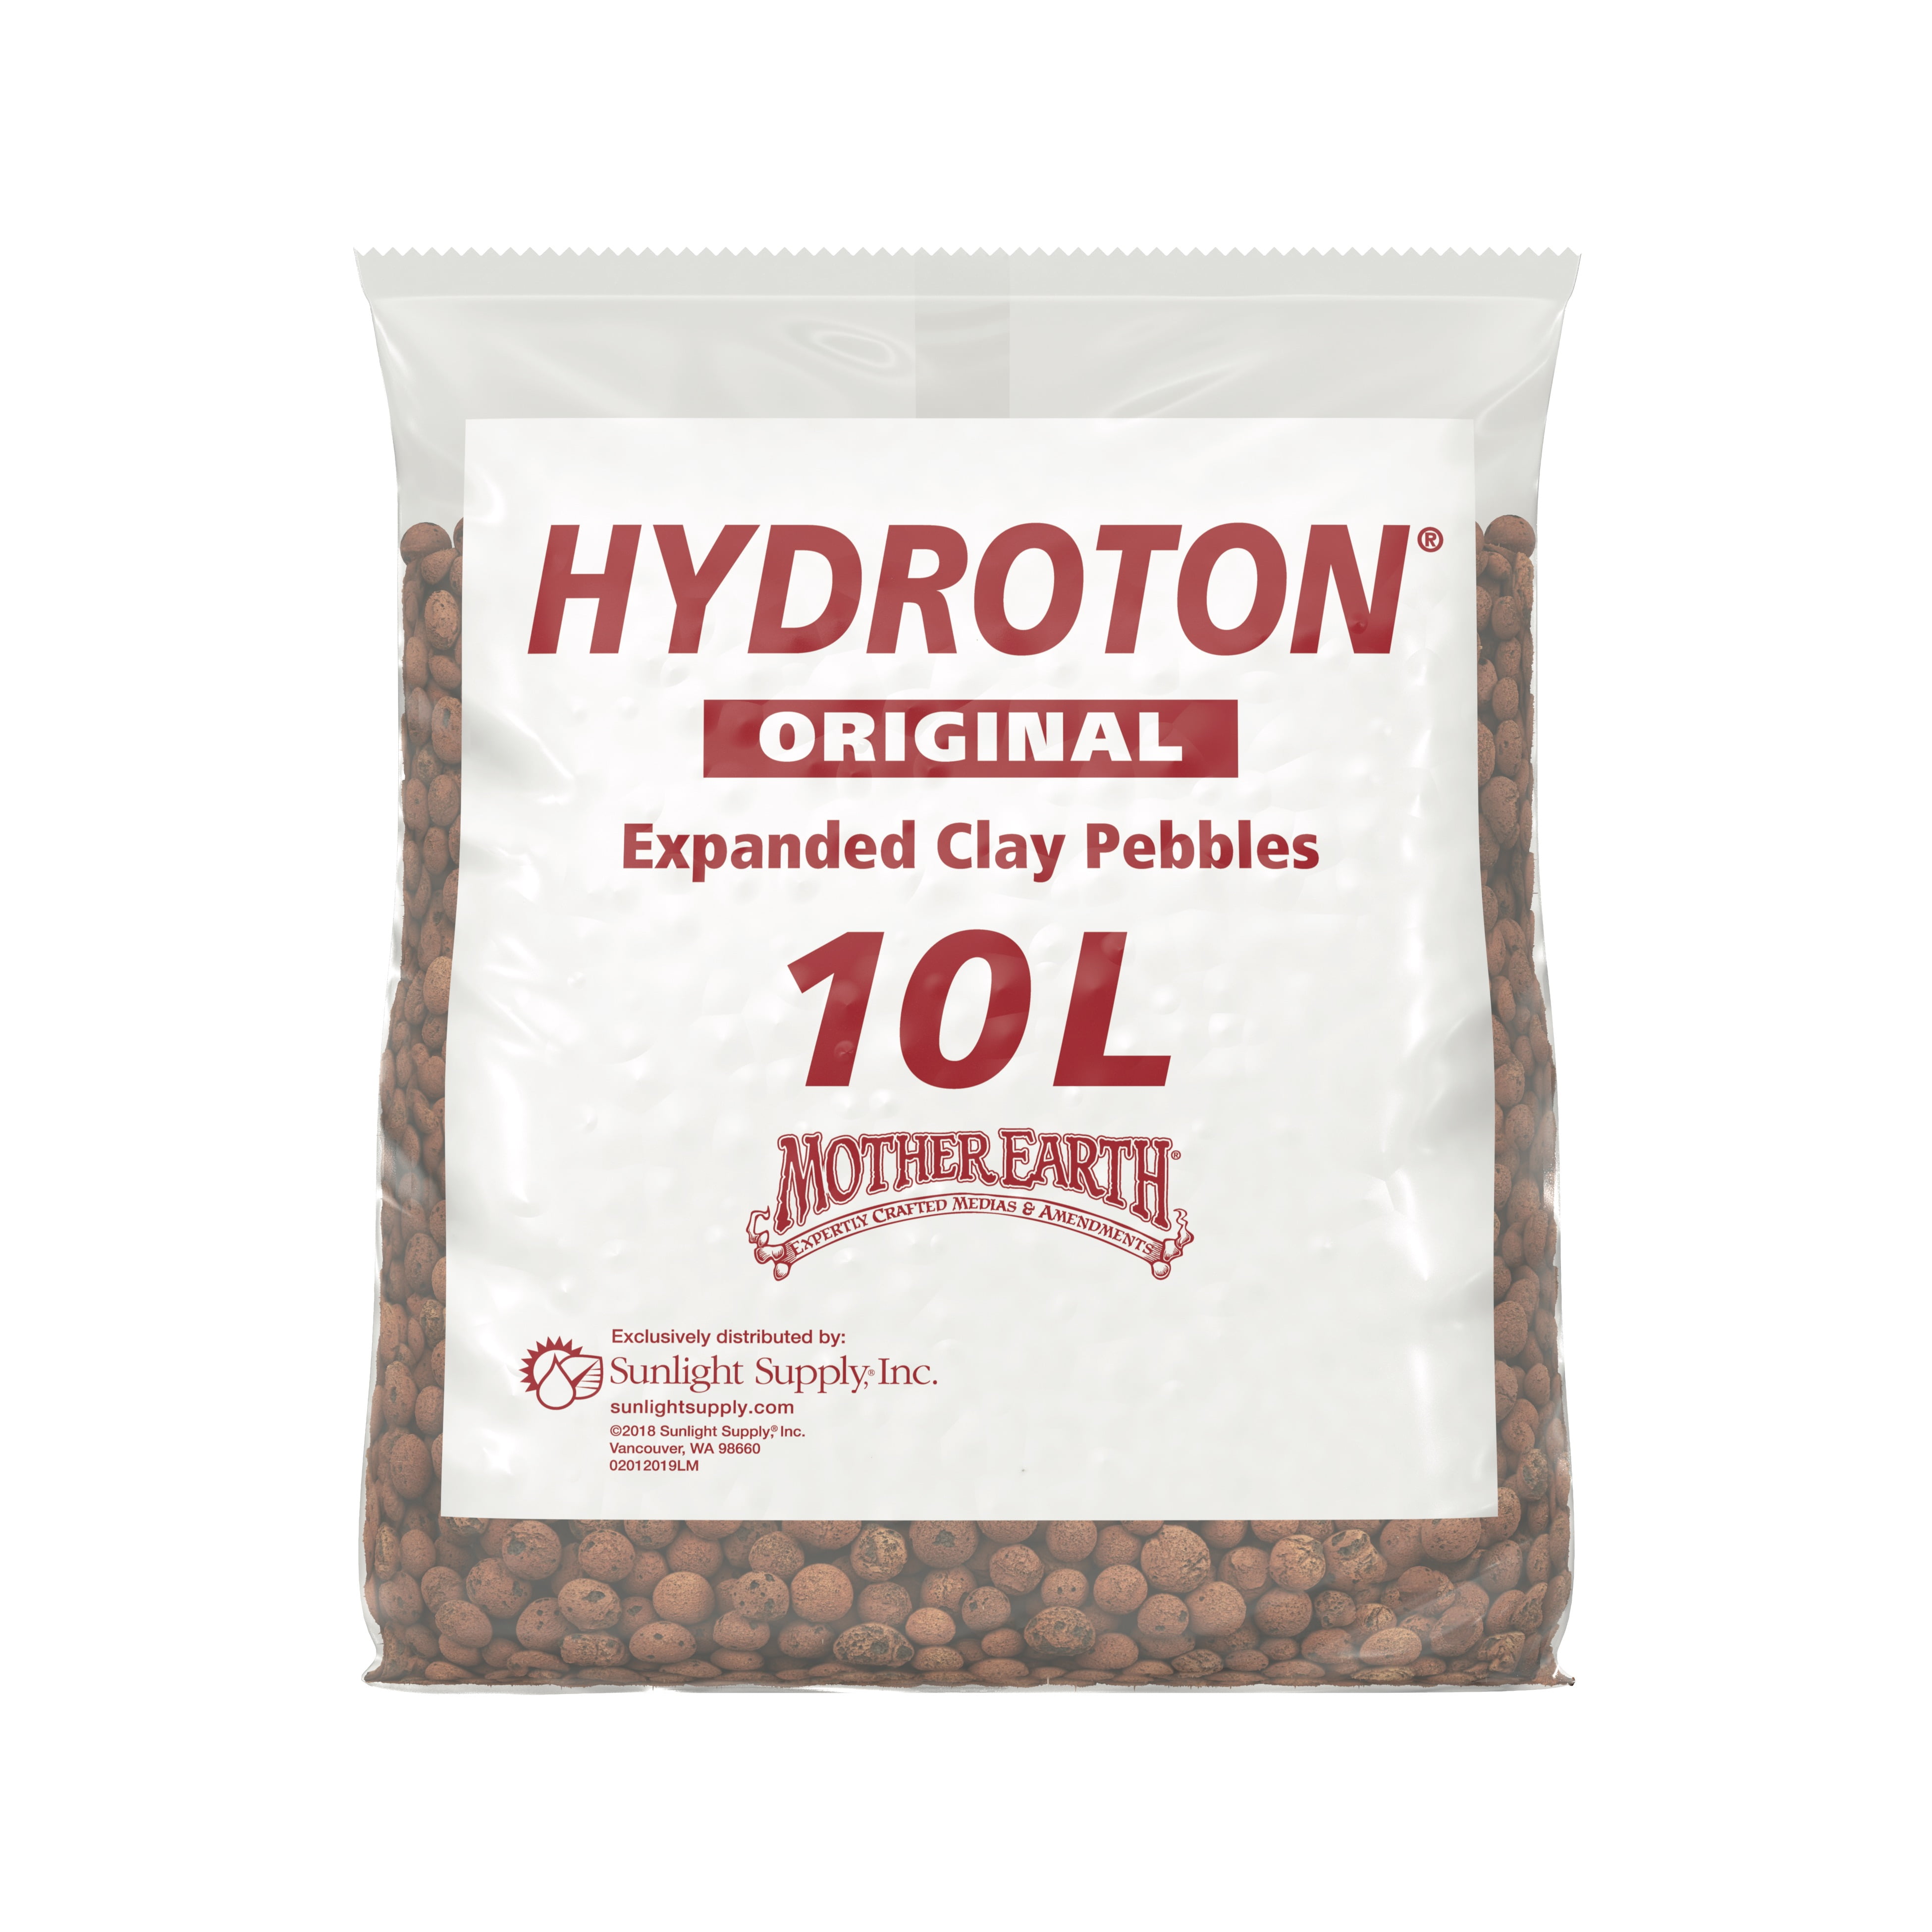 Original Hydroton® Expanded Clay Pebbles choose your Volume by Pound Details about   HYDROTON 